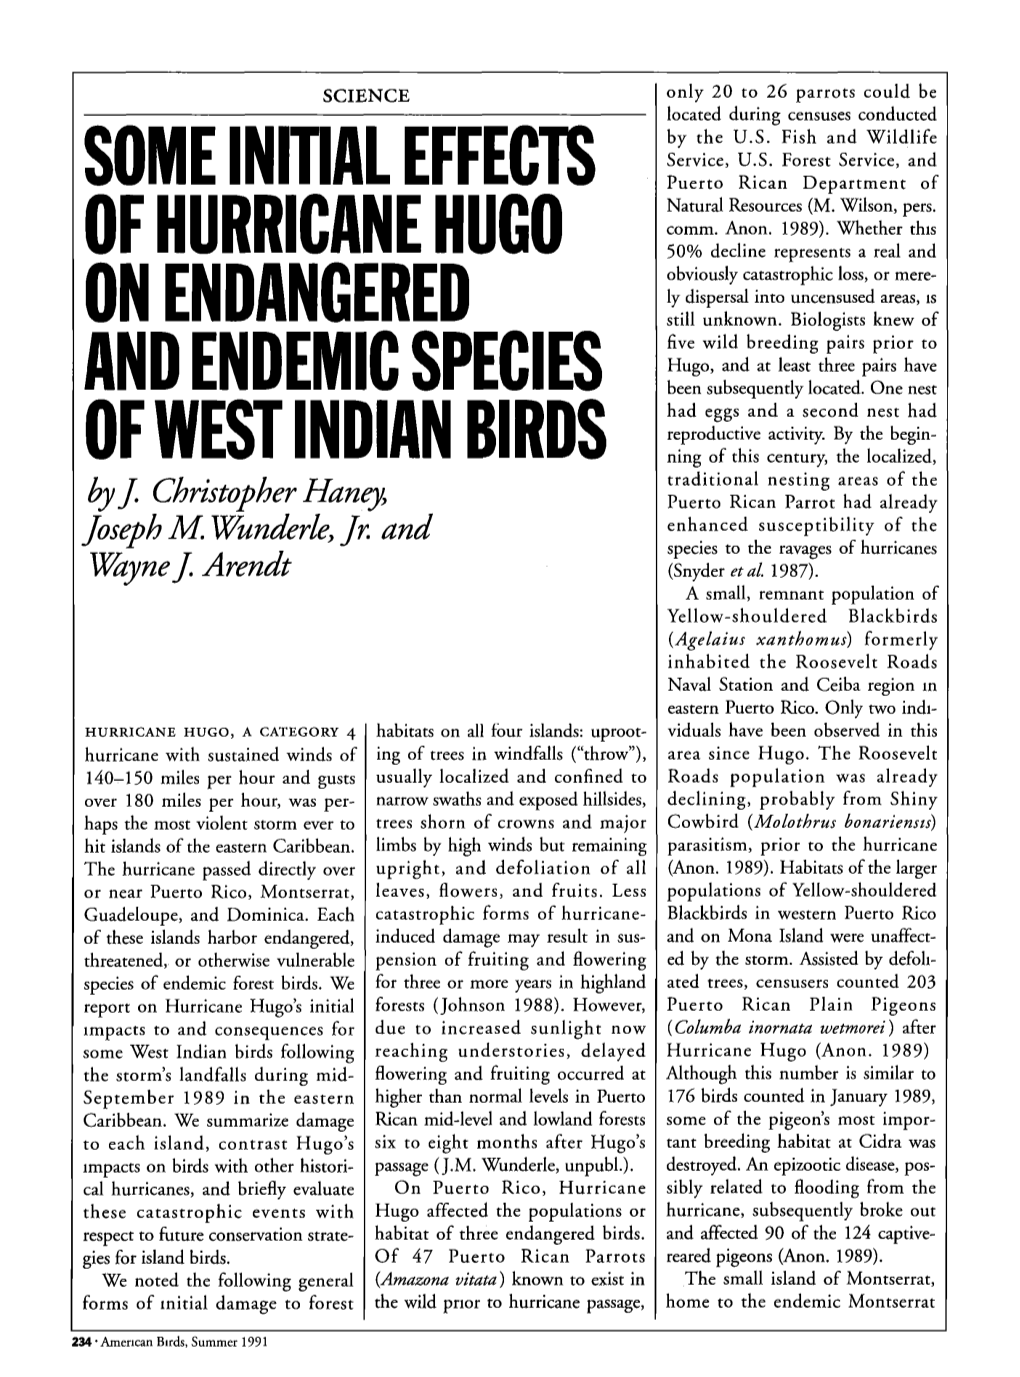 Some Initial Effects of Hurricane Hugo on Endangered and Endemic